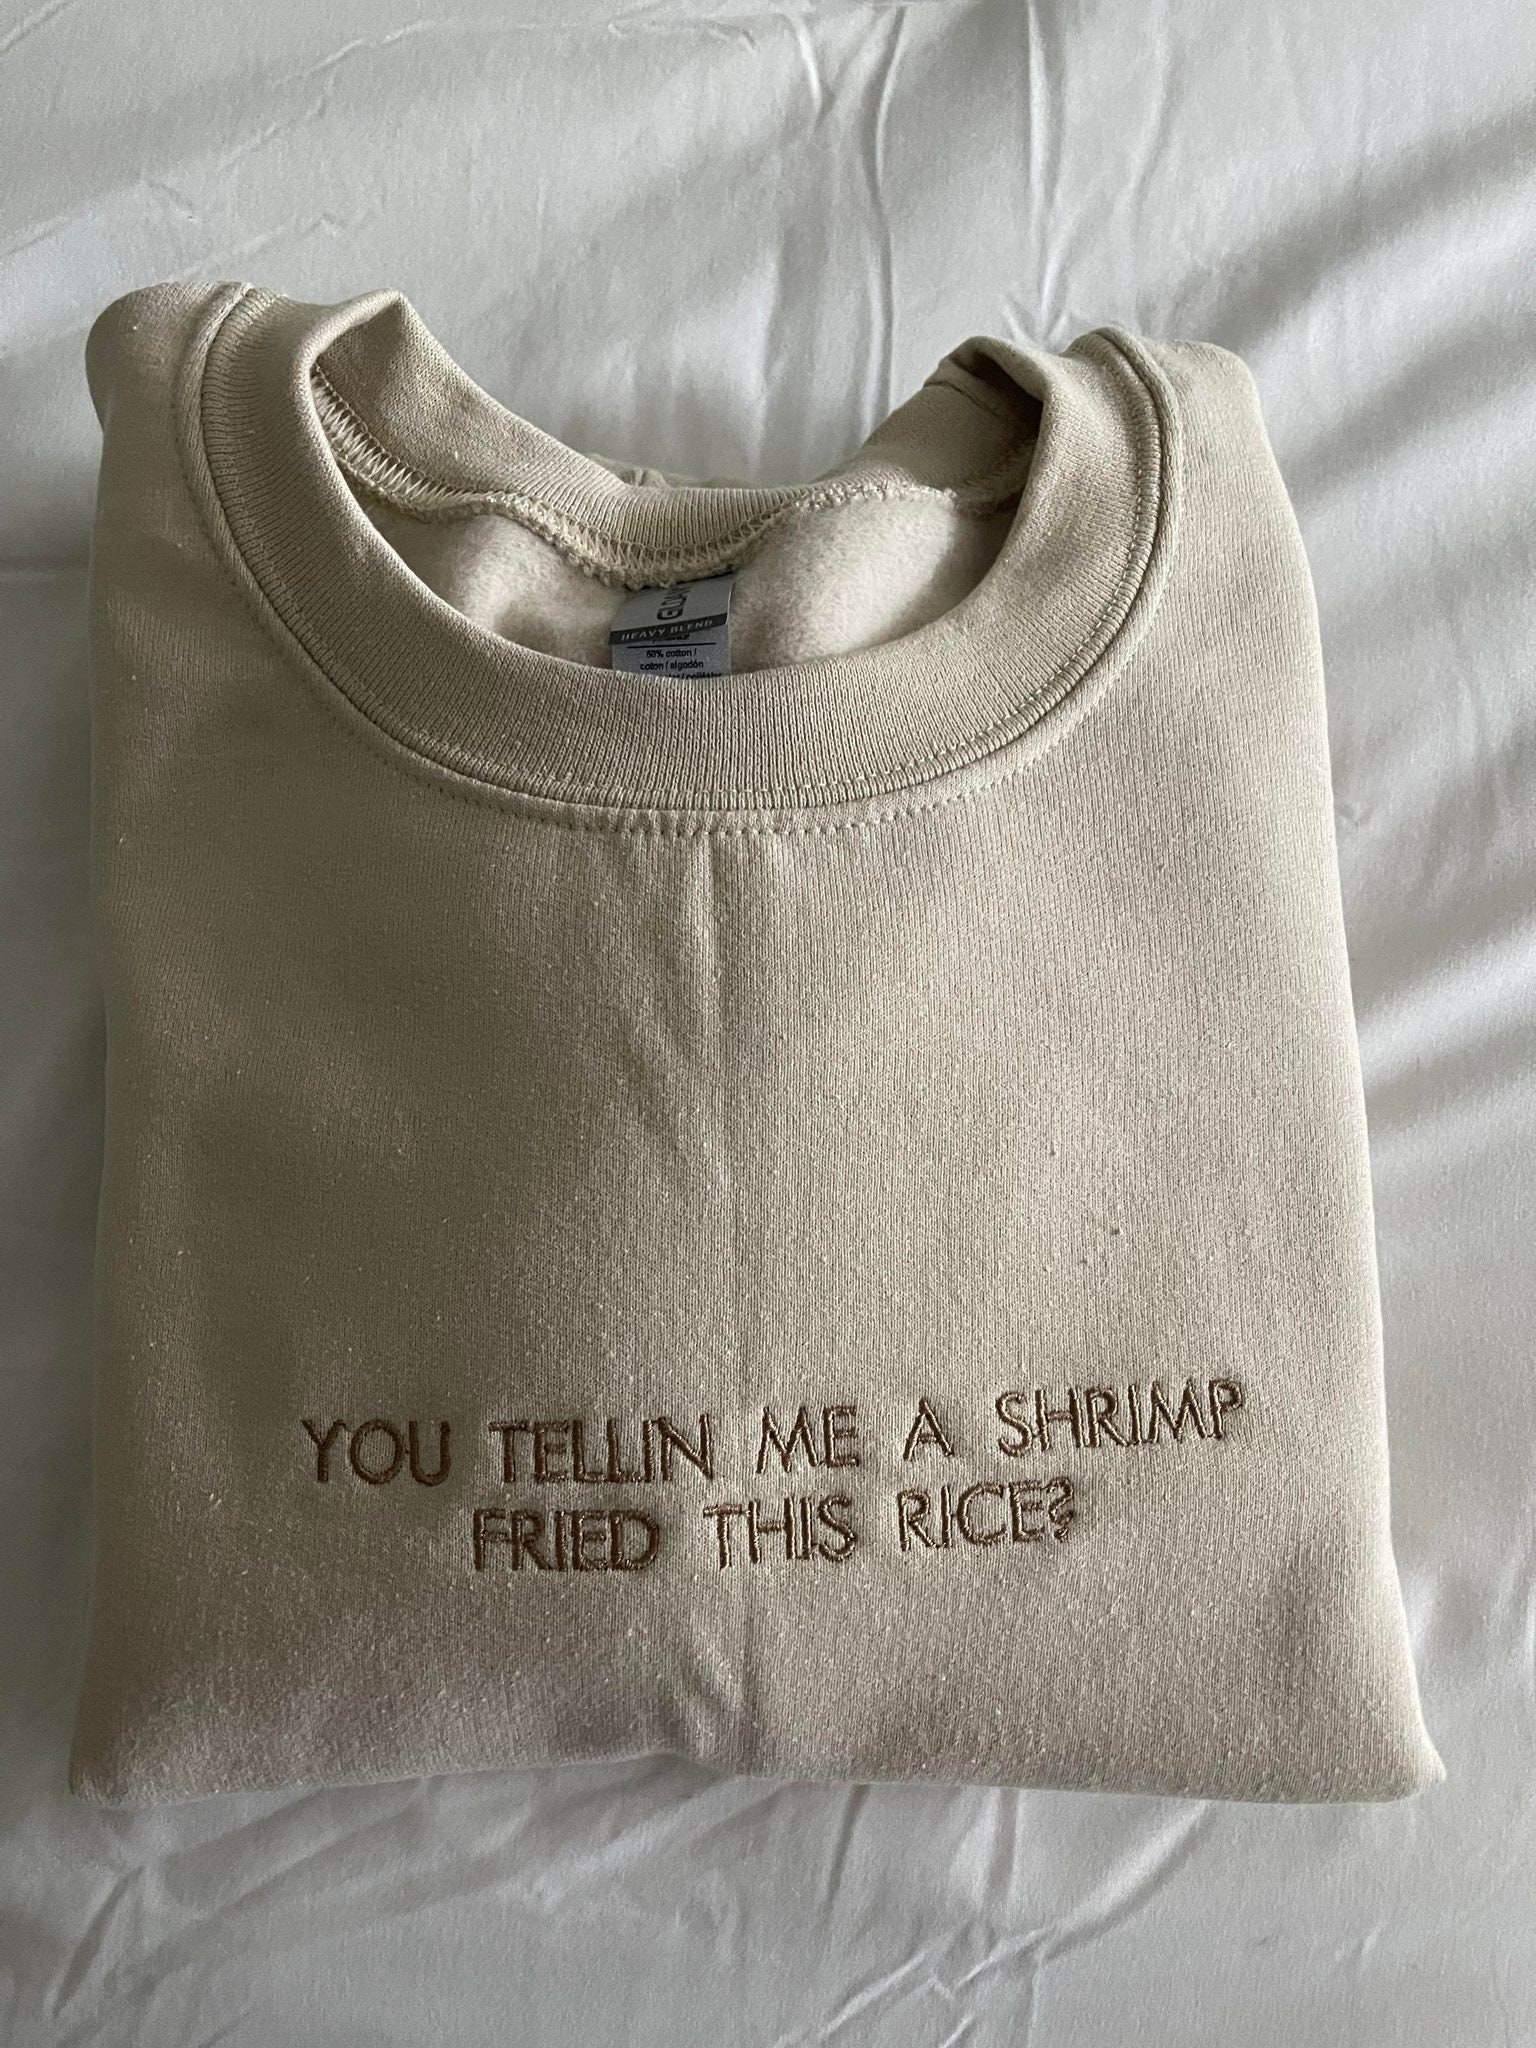 Shrimp Fried This Rice Funny Embroidered Sweatshirt